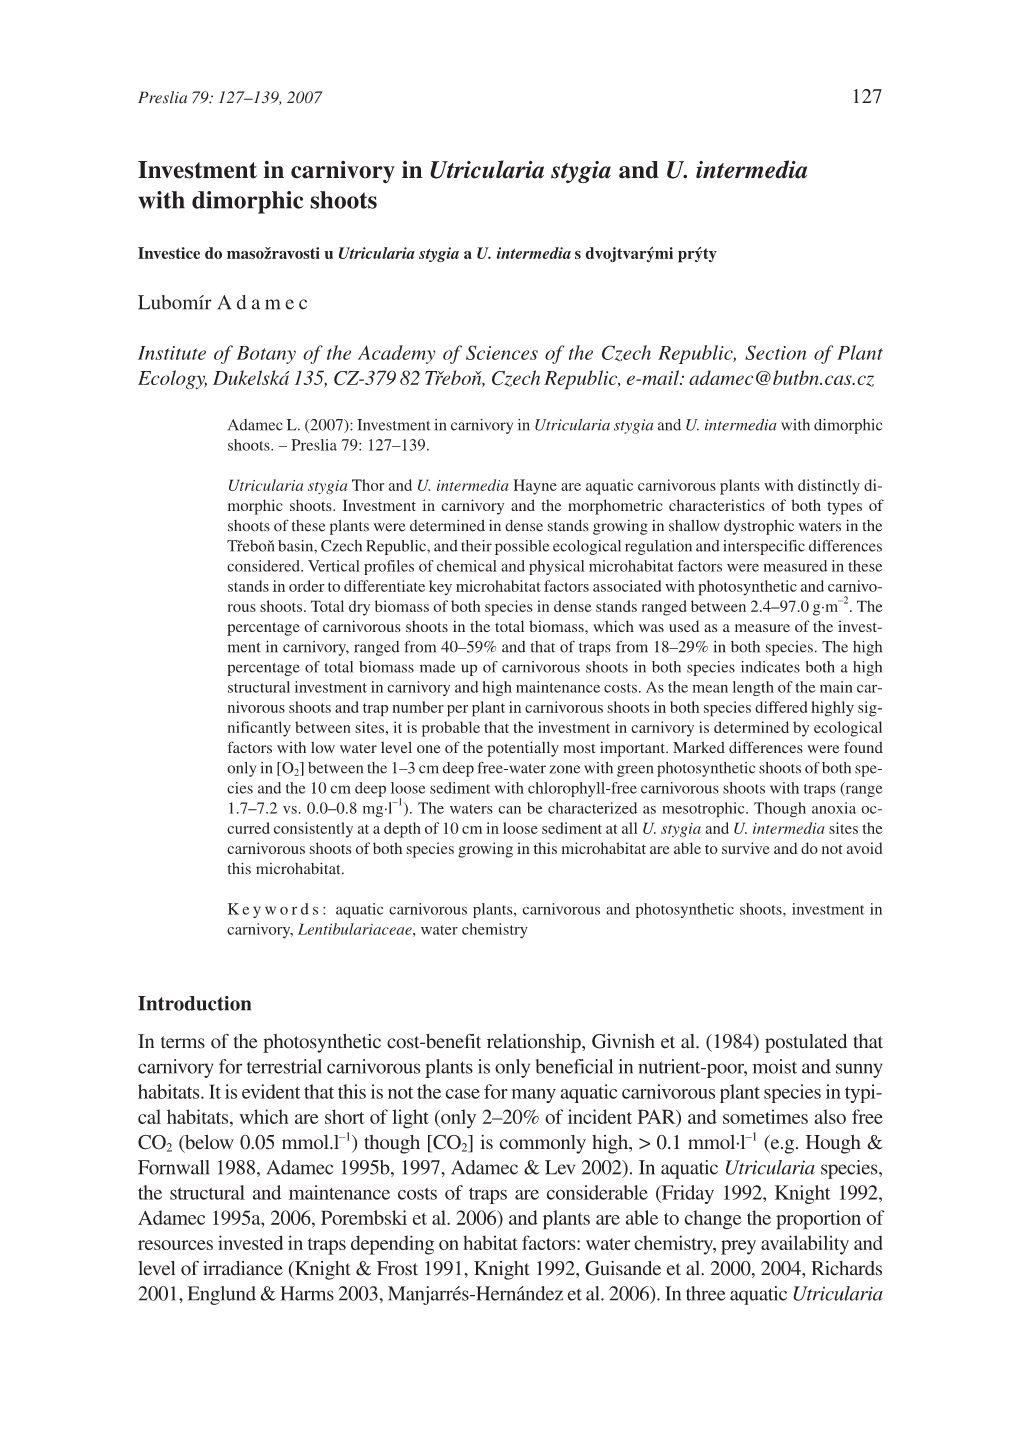 Investment in Carnivory in Utricularia Stygia and U. Intermedia with Dimorphic Shoots